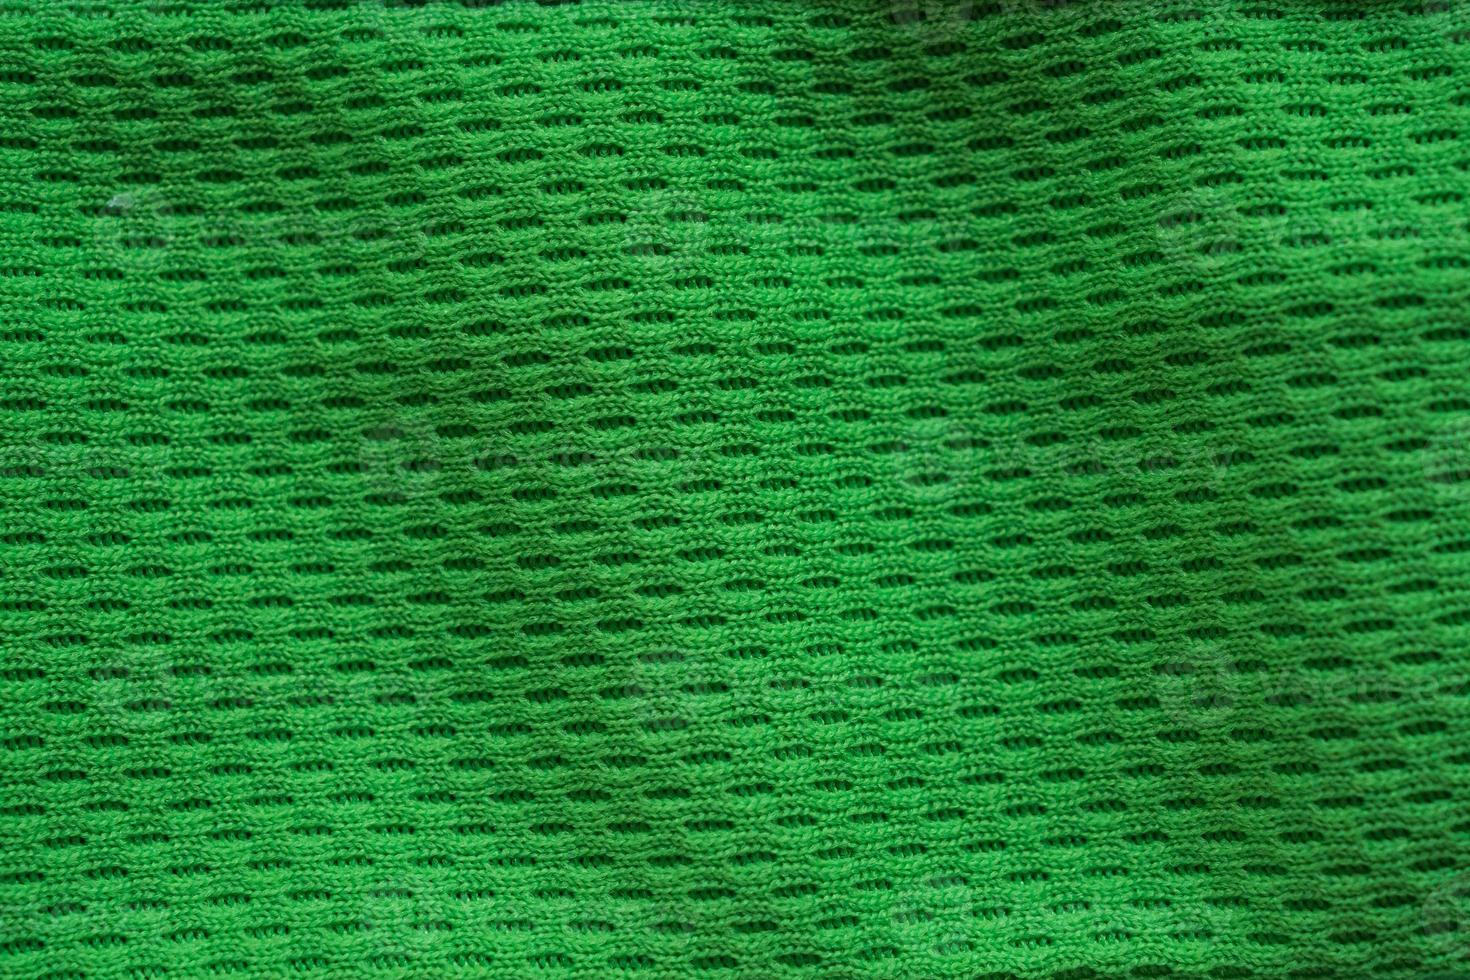 Green fabric sport clothing football jersey with air mesh texture background photo